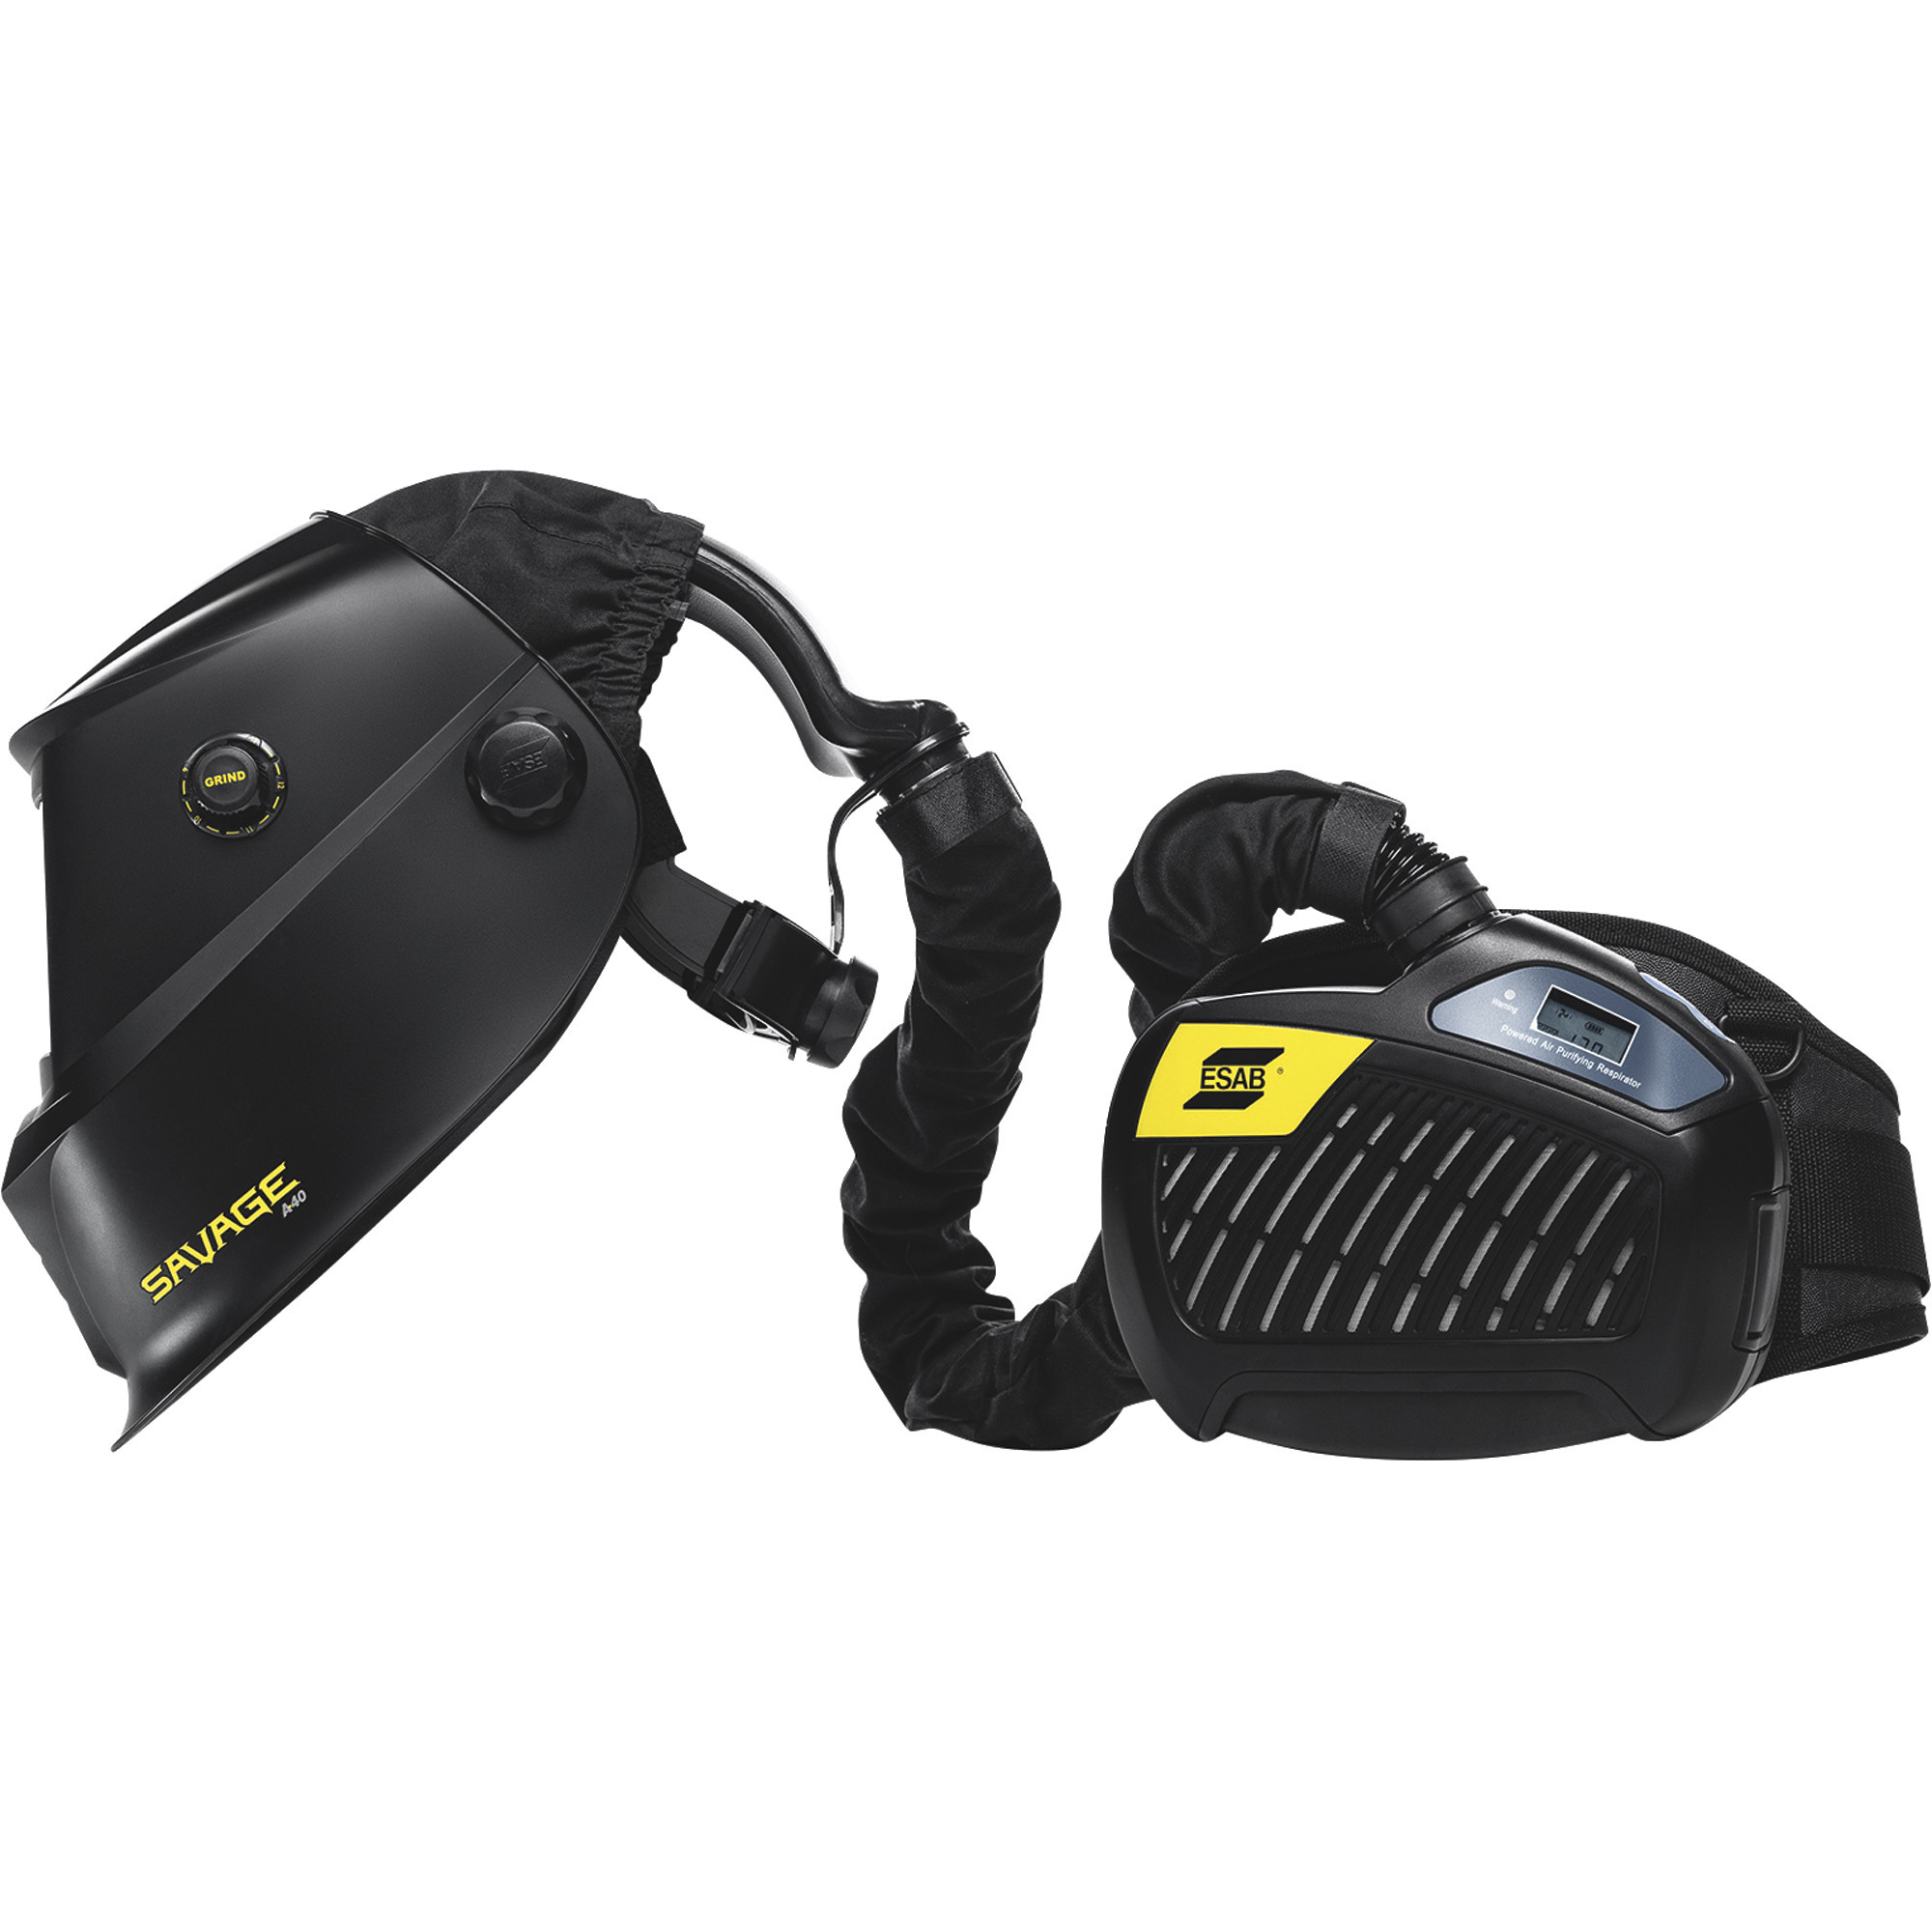 ESAB Freezone Savage A40 PAPR Welding Helmet with Grind Mode and Filter/Blower System â Solid Black, Model 0700002400